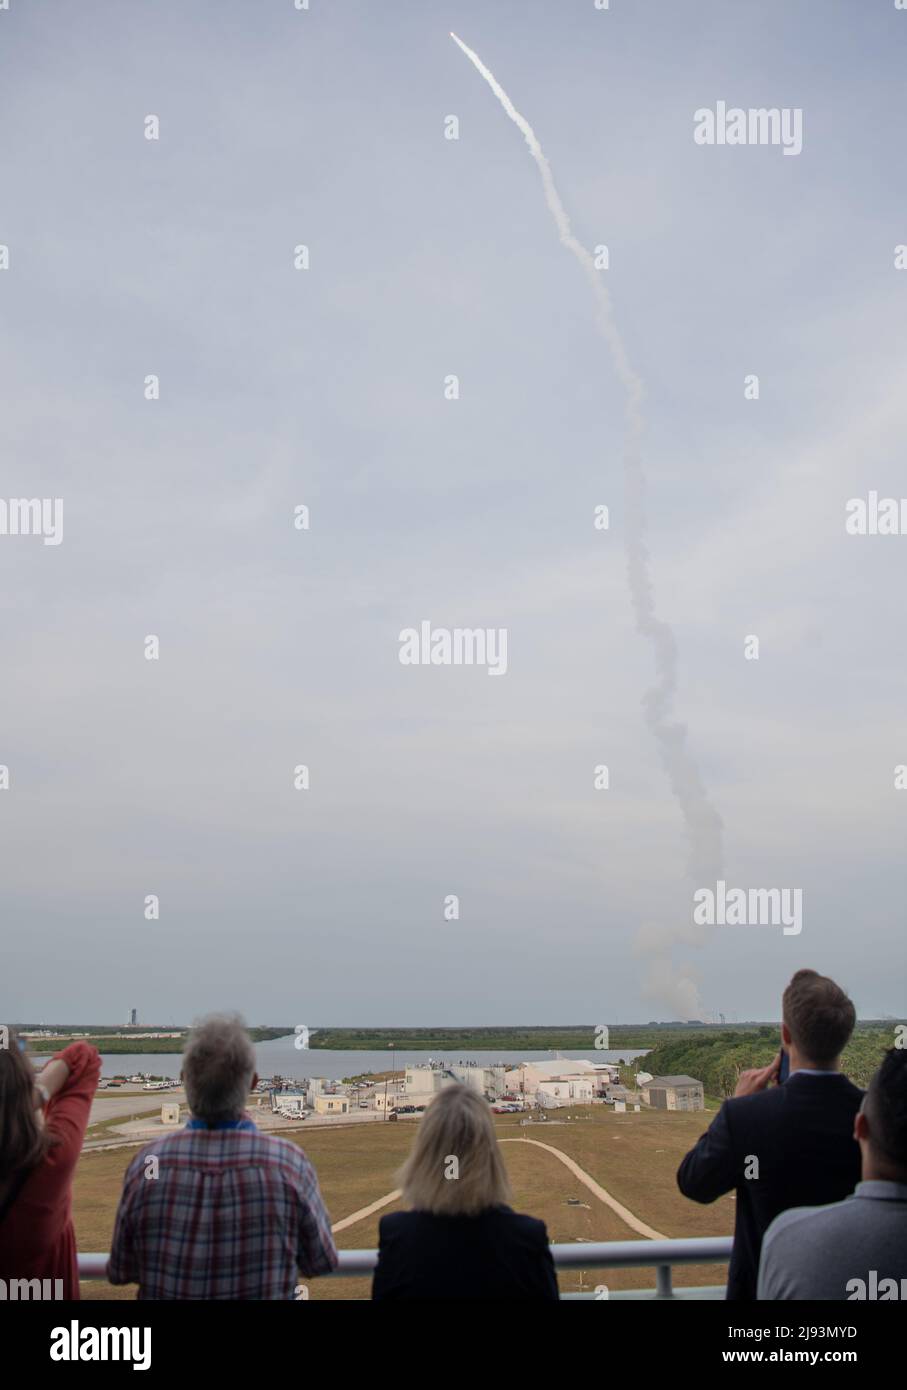 Cape Canaveral, United States of America. 19 May, 2022. NASA Deputy Administrator Pam Melroy, center, watches the United Launch Alliance Atlas V rocket carrying the Boeing CST-100 Starliner spacecraft lift off from Space Launch Complex 41, May 19, 2022 in Cape Canaveral, Florida. The successful Orbital Flight Test-2 is the second un-crewed flight test and will dock to the International Space Station. Credit: Joel Kowsky/NASA/Alamy Live News Stock Photo